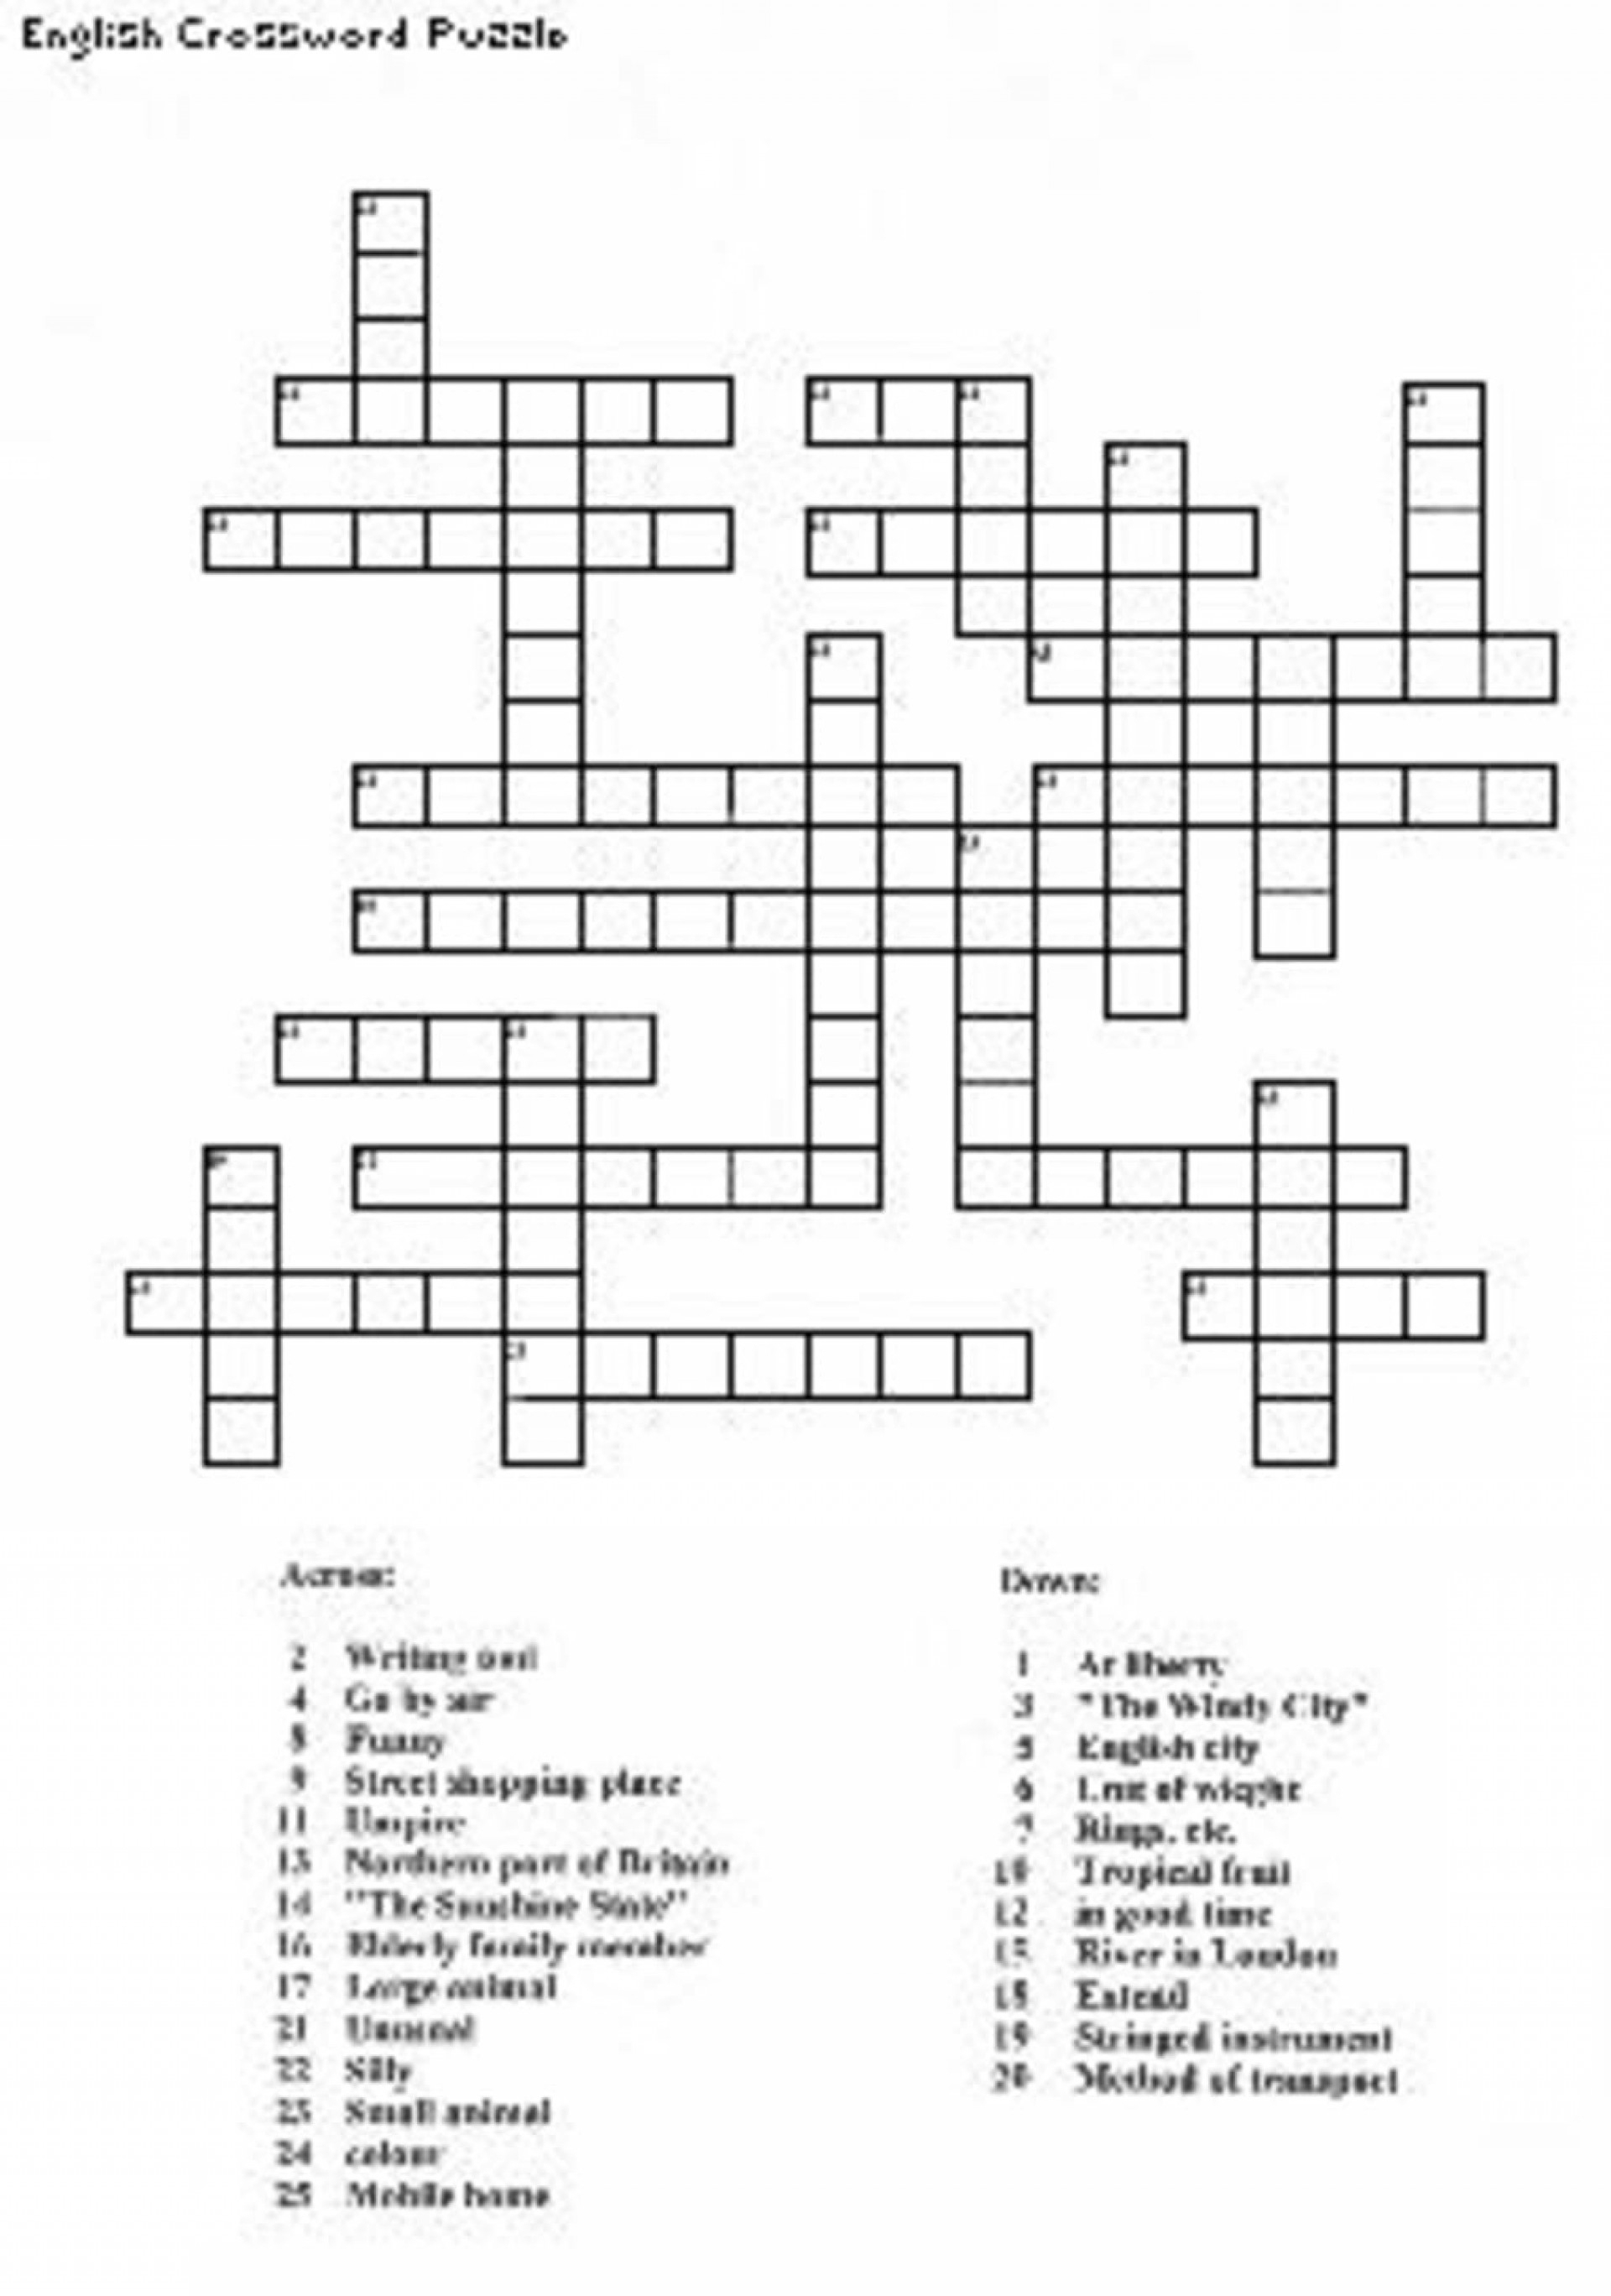 Crossword Puzzle Maker Free Printable Toolbox Screenshot - Create A - Printable Crossword Puzzle Template